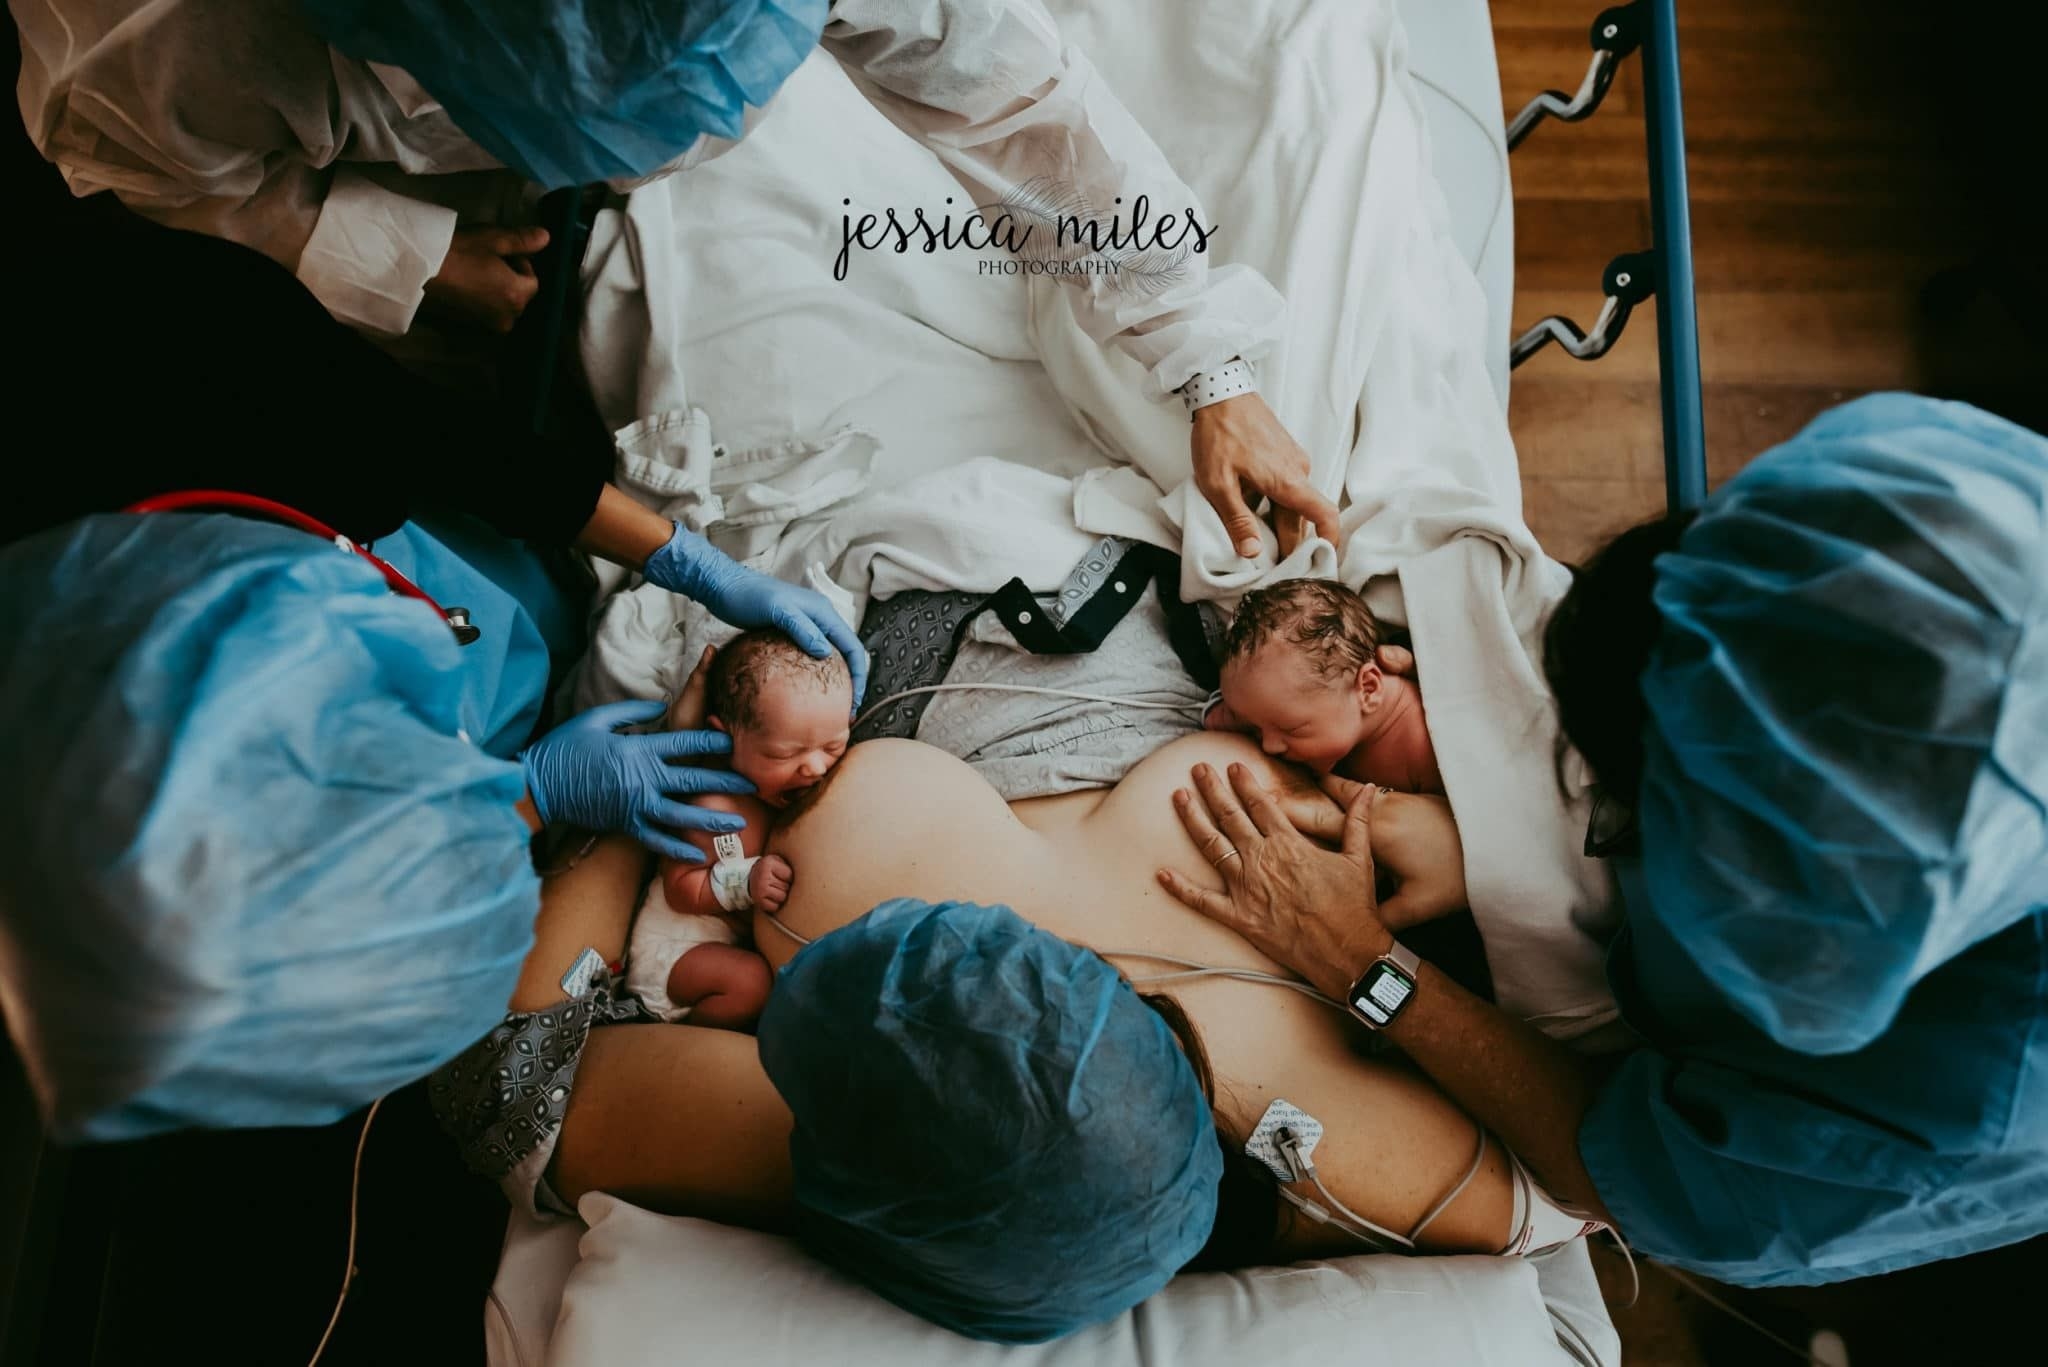 A woman tries breastfeeding twins, one on each breast, immediately after delivery